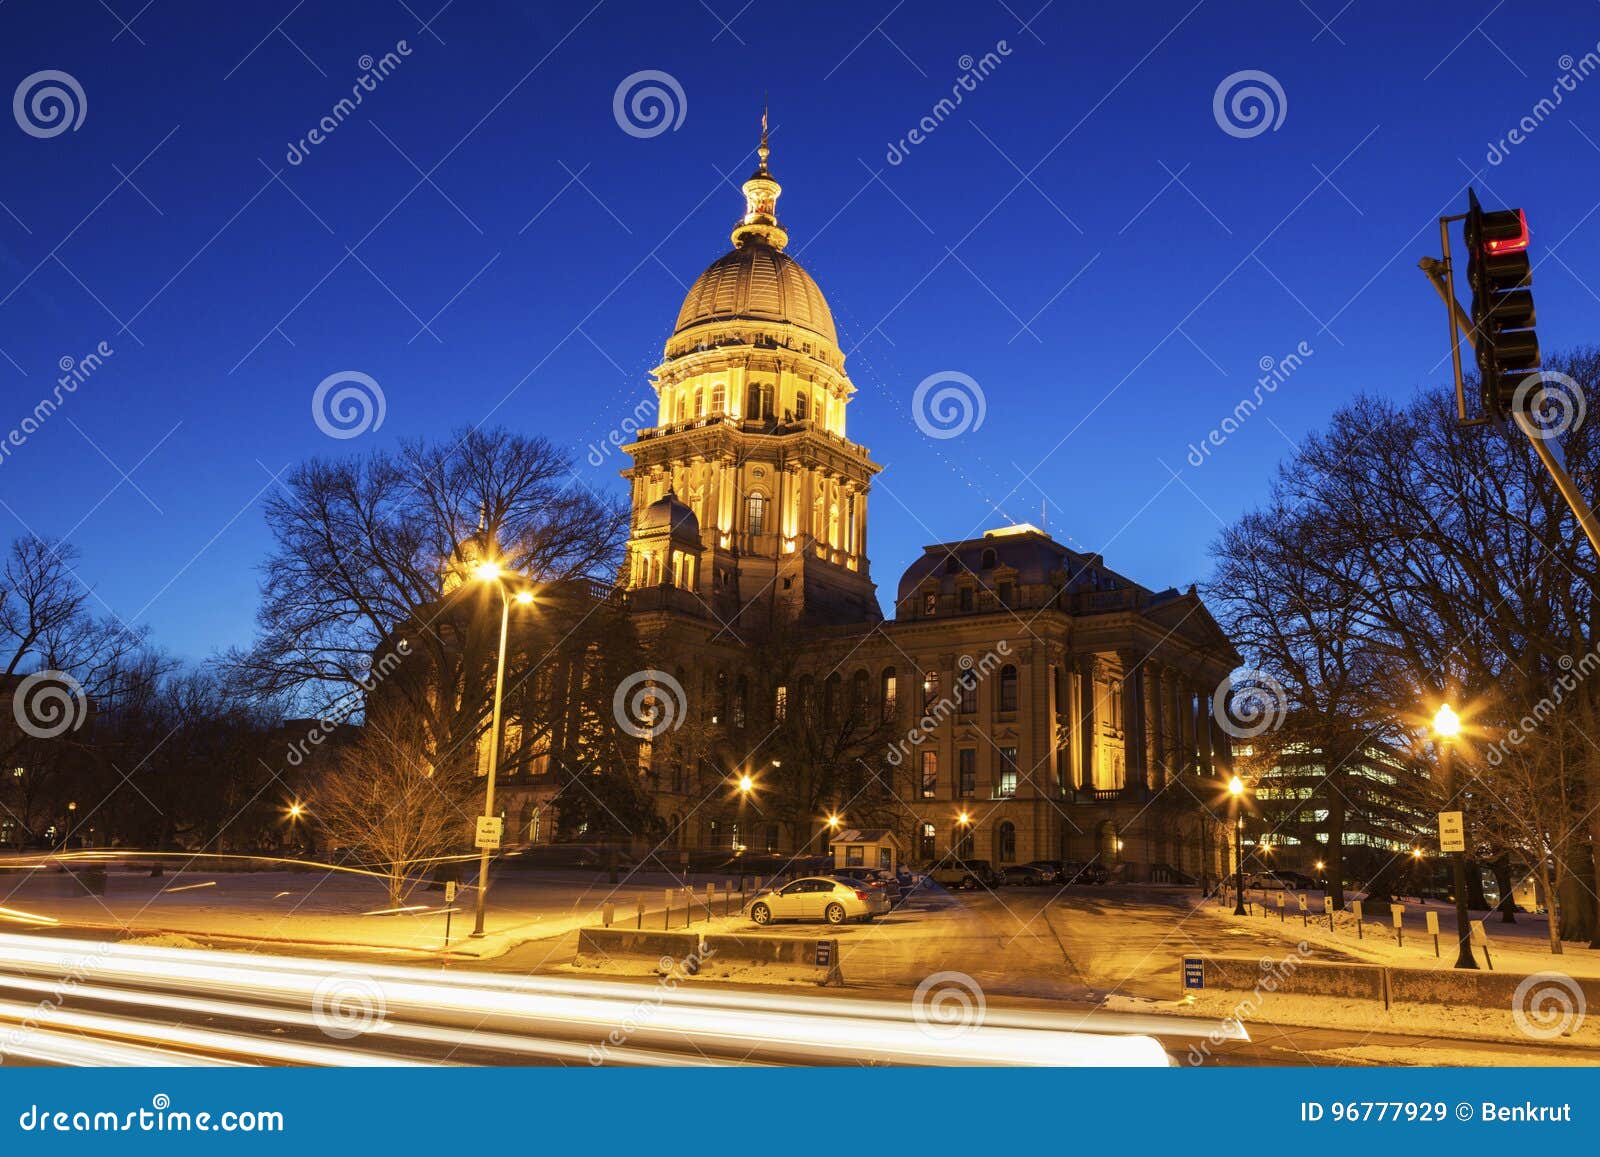 springfield, illinois - state capitol building